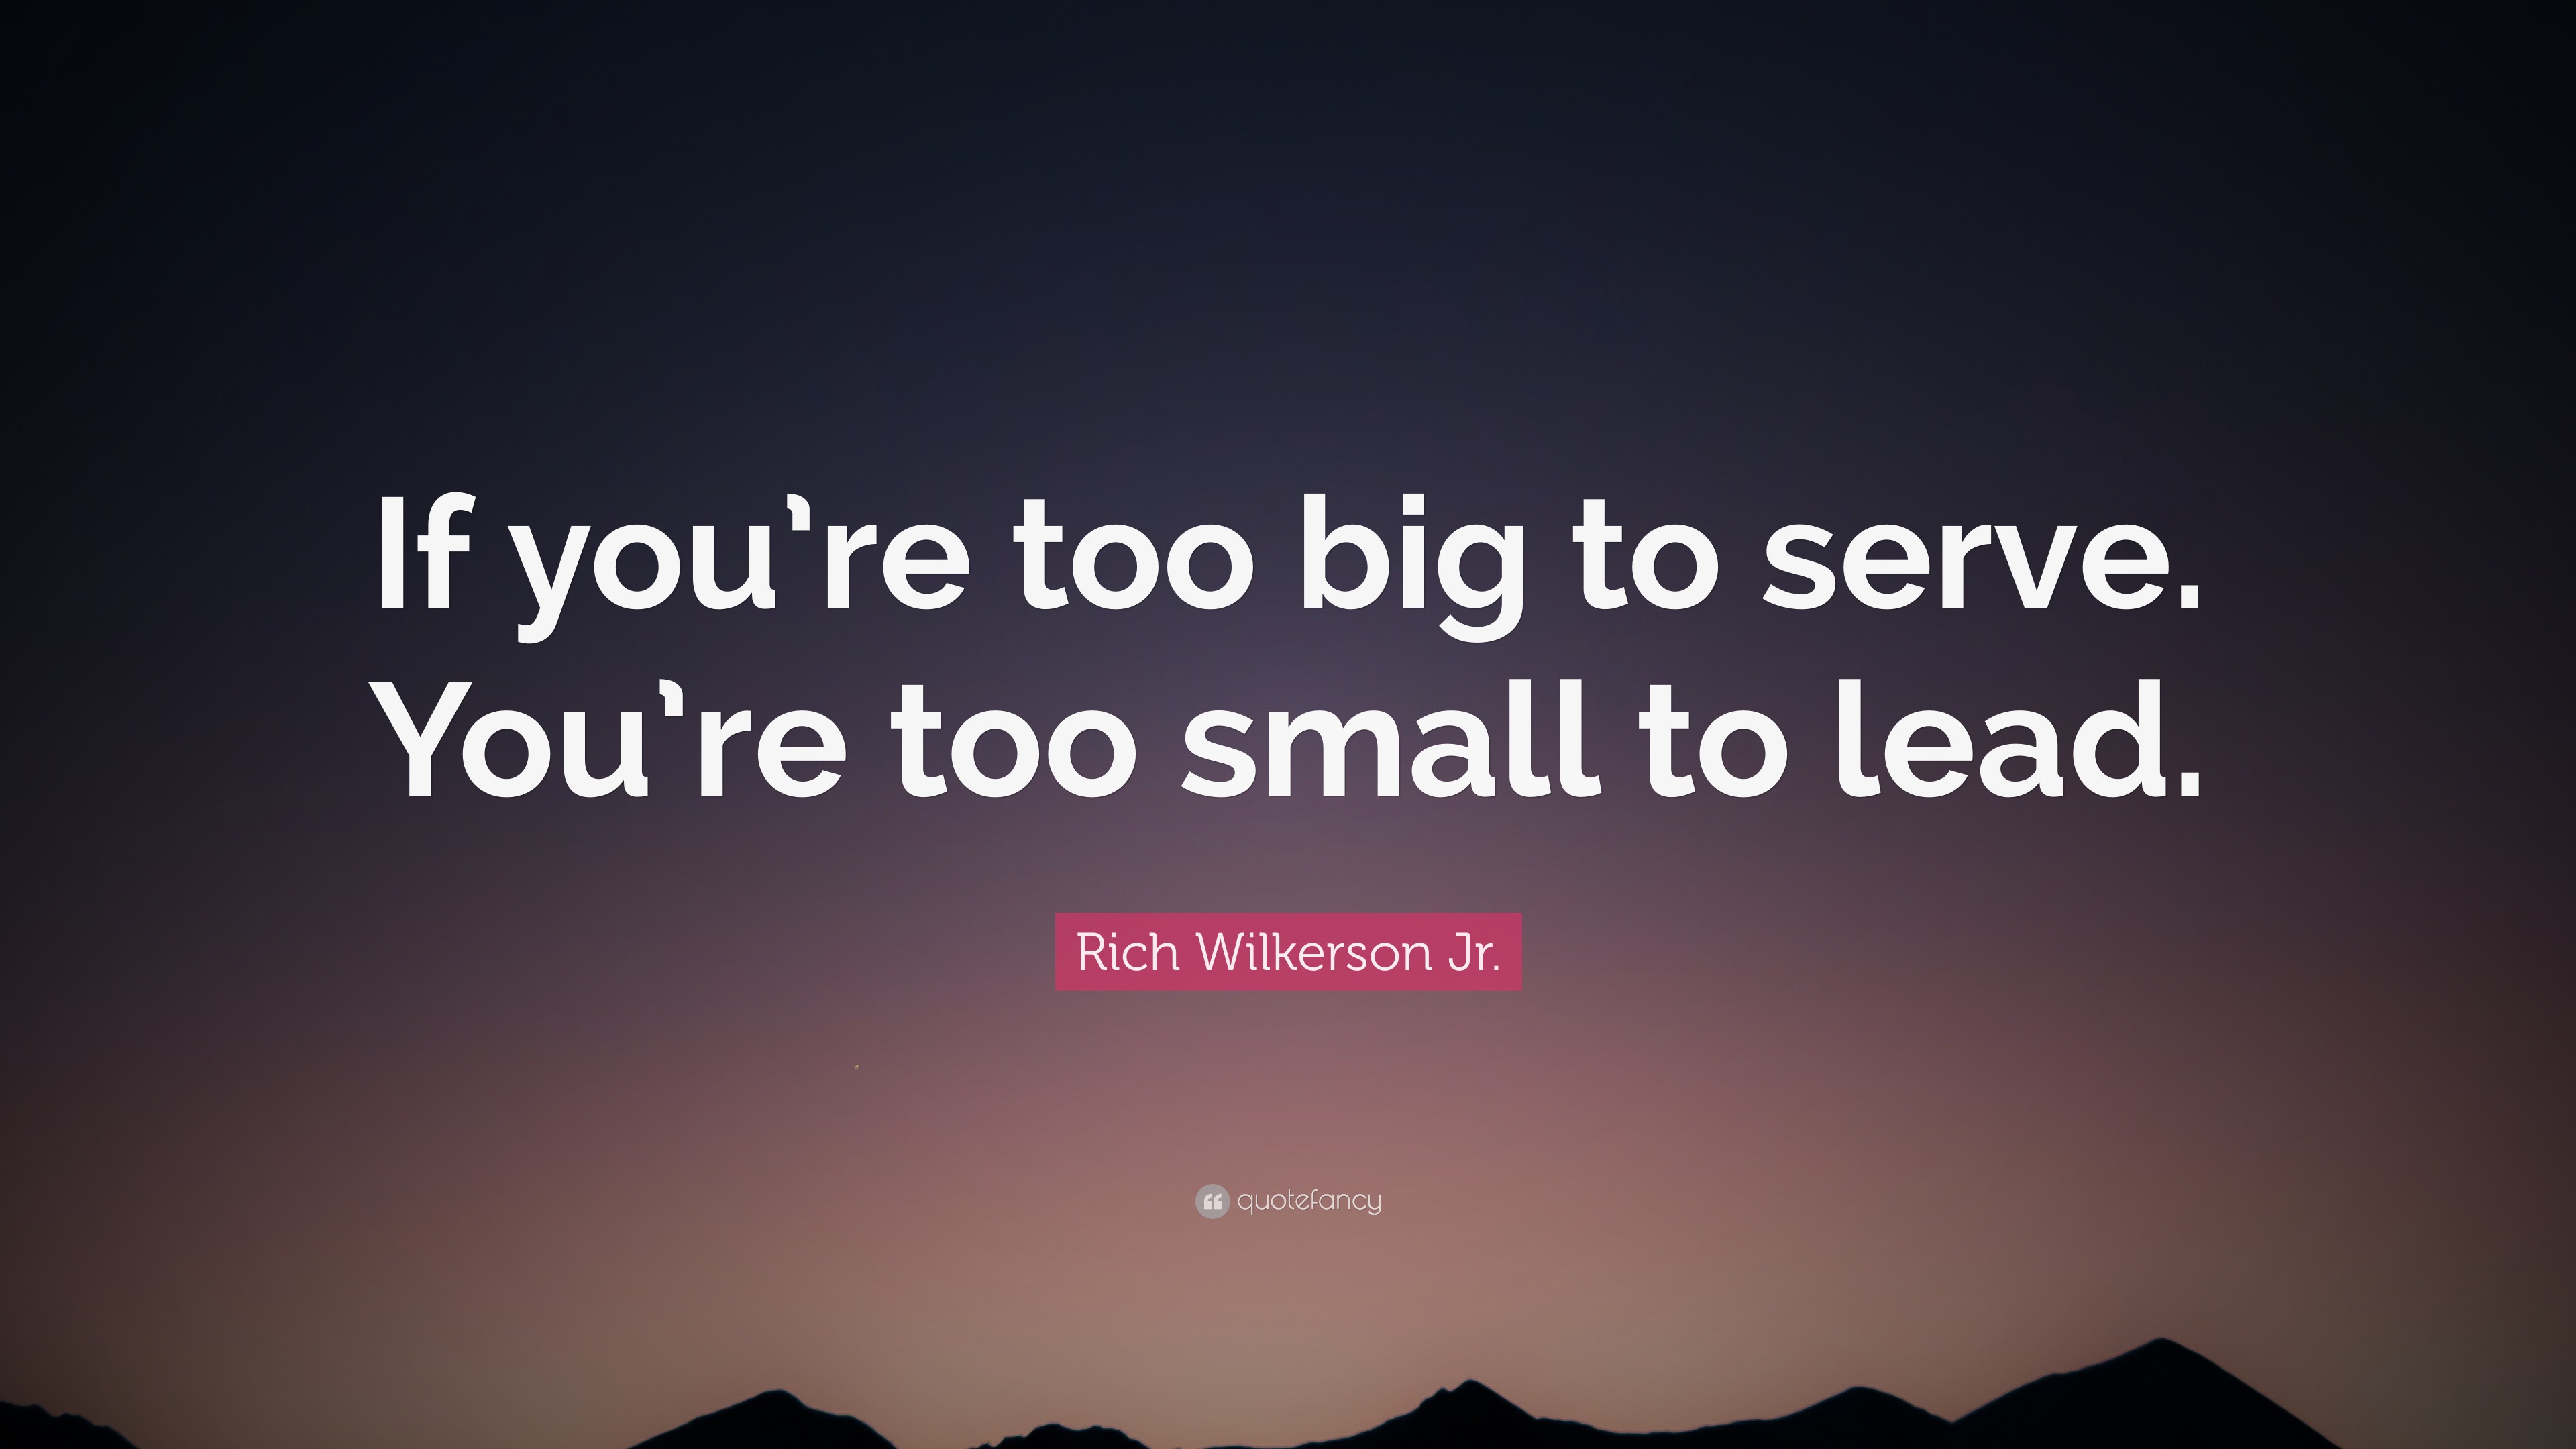 Rich Wilkerson Jr. quote: If you're too big to serve. You're too small to